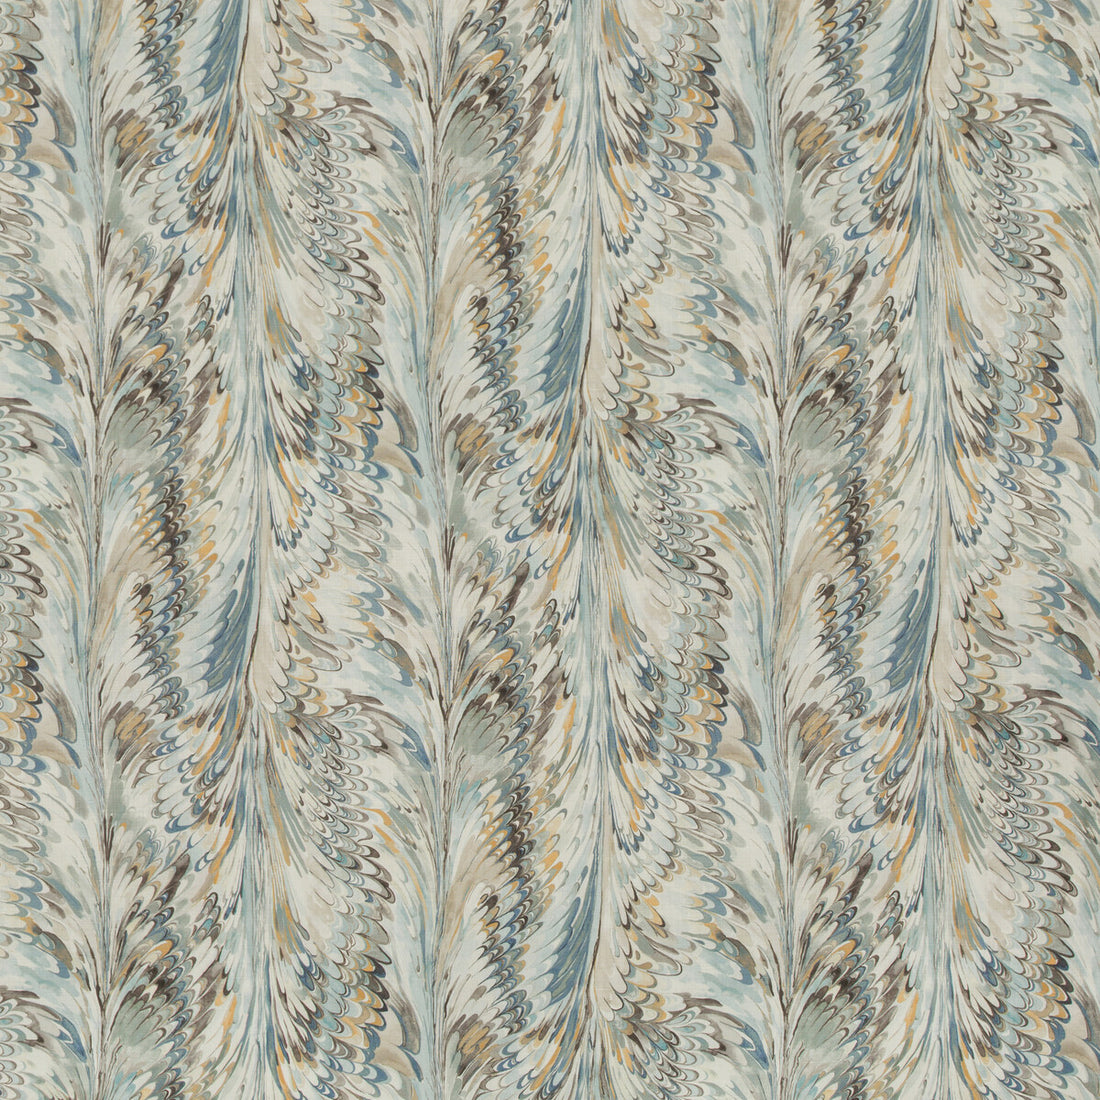 Taplow Print fabric in sea mist color - pattern 2019114.135.0 - by Lee Jofa in the Manor House collection